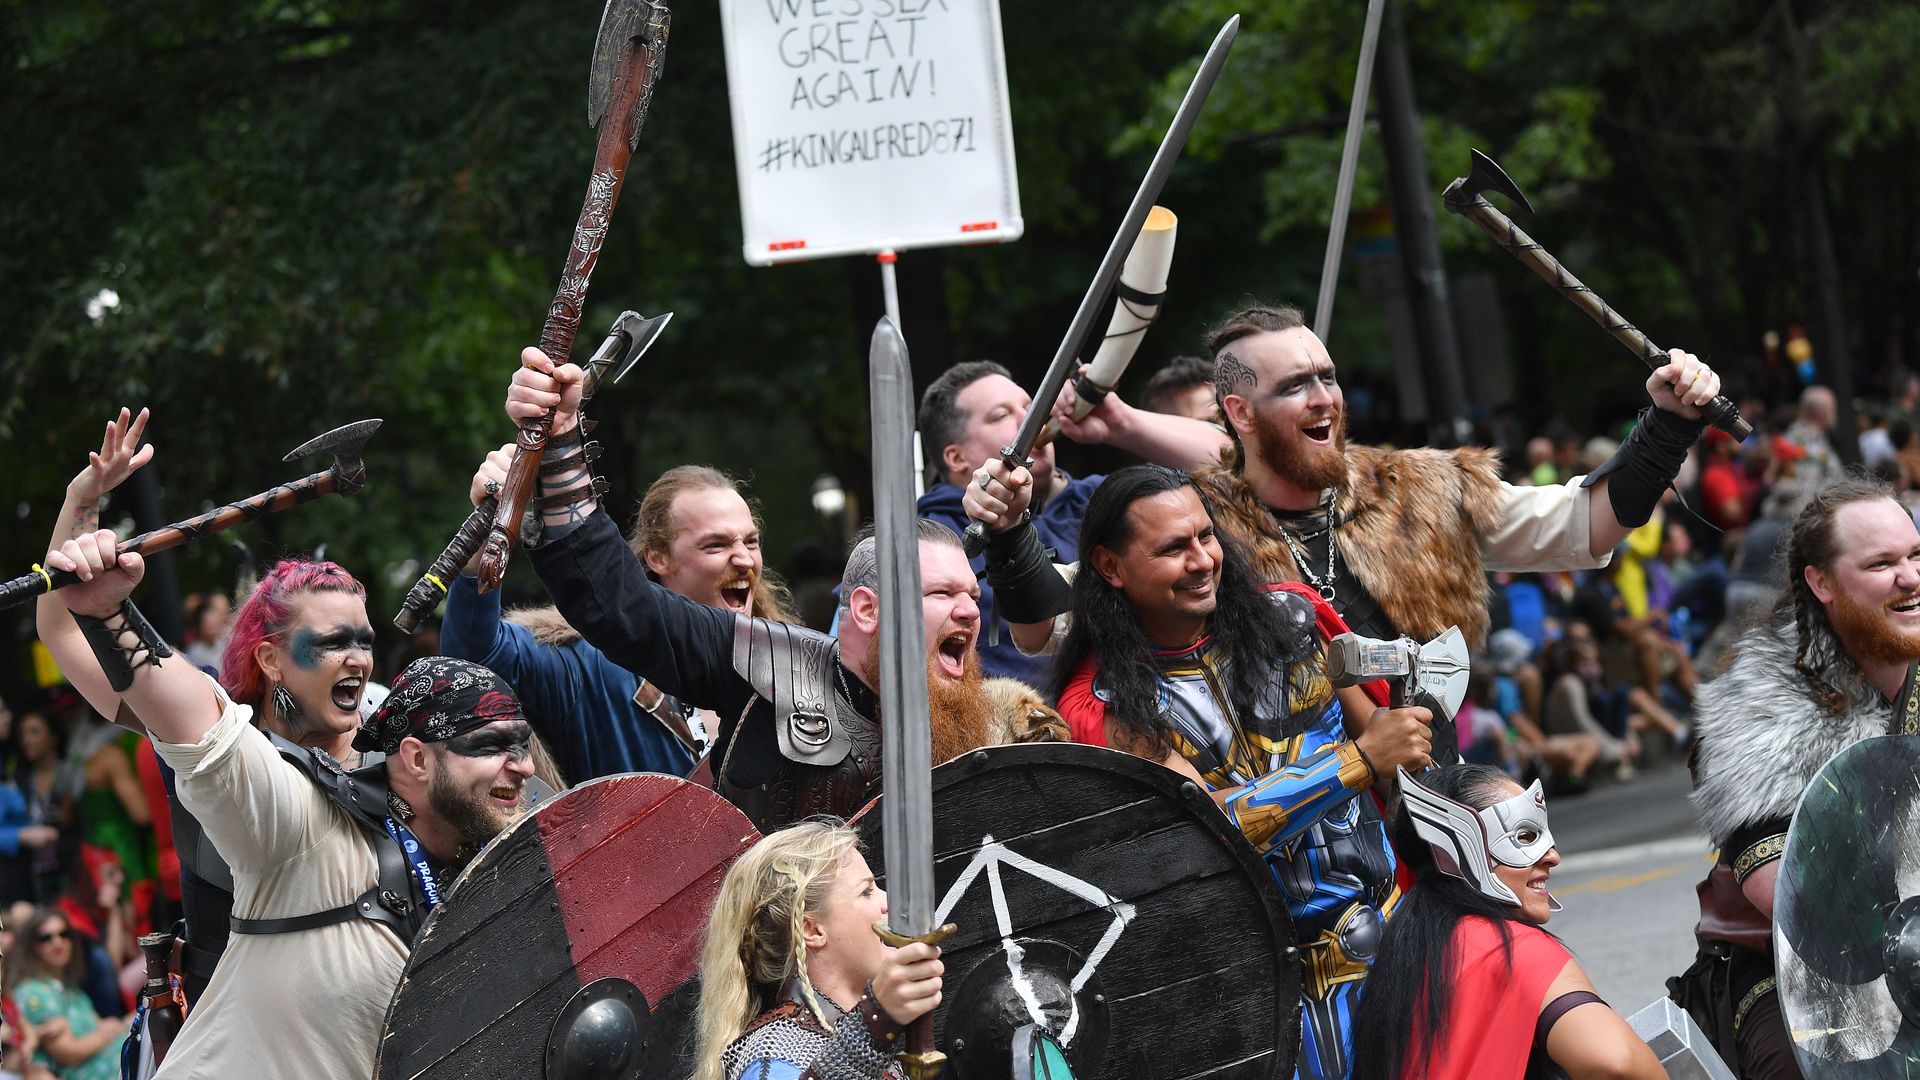 A group of people dressed as vikings and holding a sign saying "Make Wessex Great Again" pose for a photographer during a parade